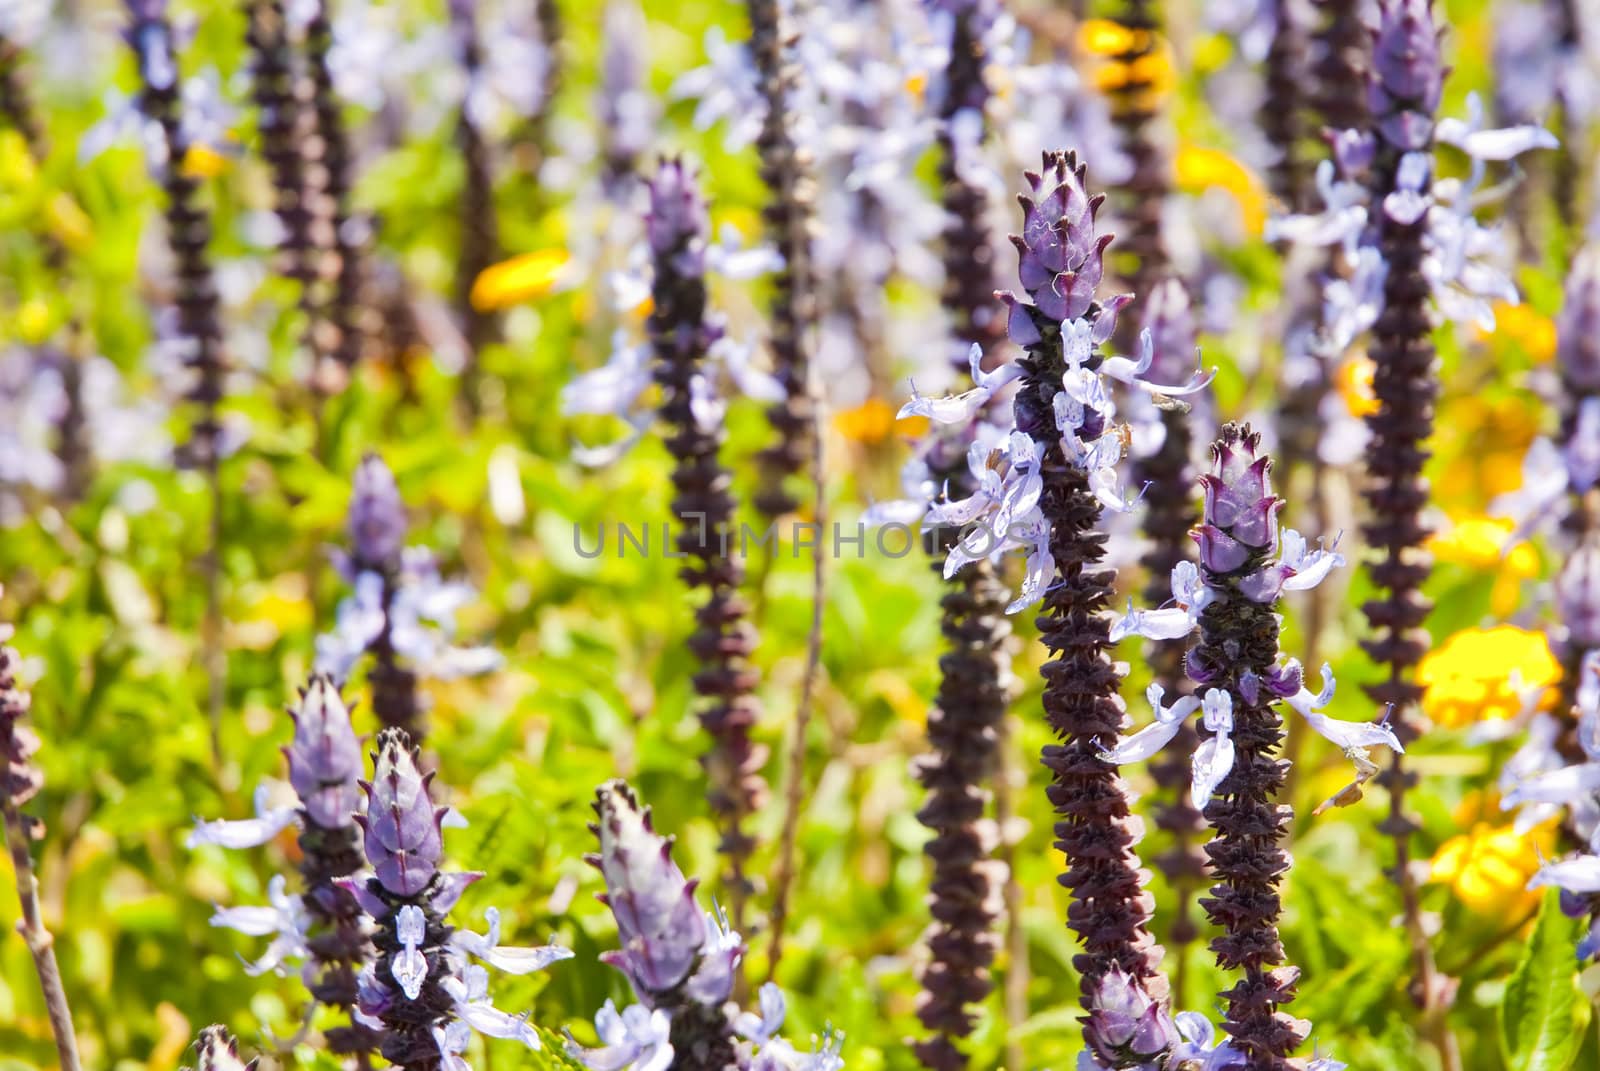 Purple lavender flowers growing wildly in a field with green plants surrounding them